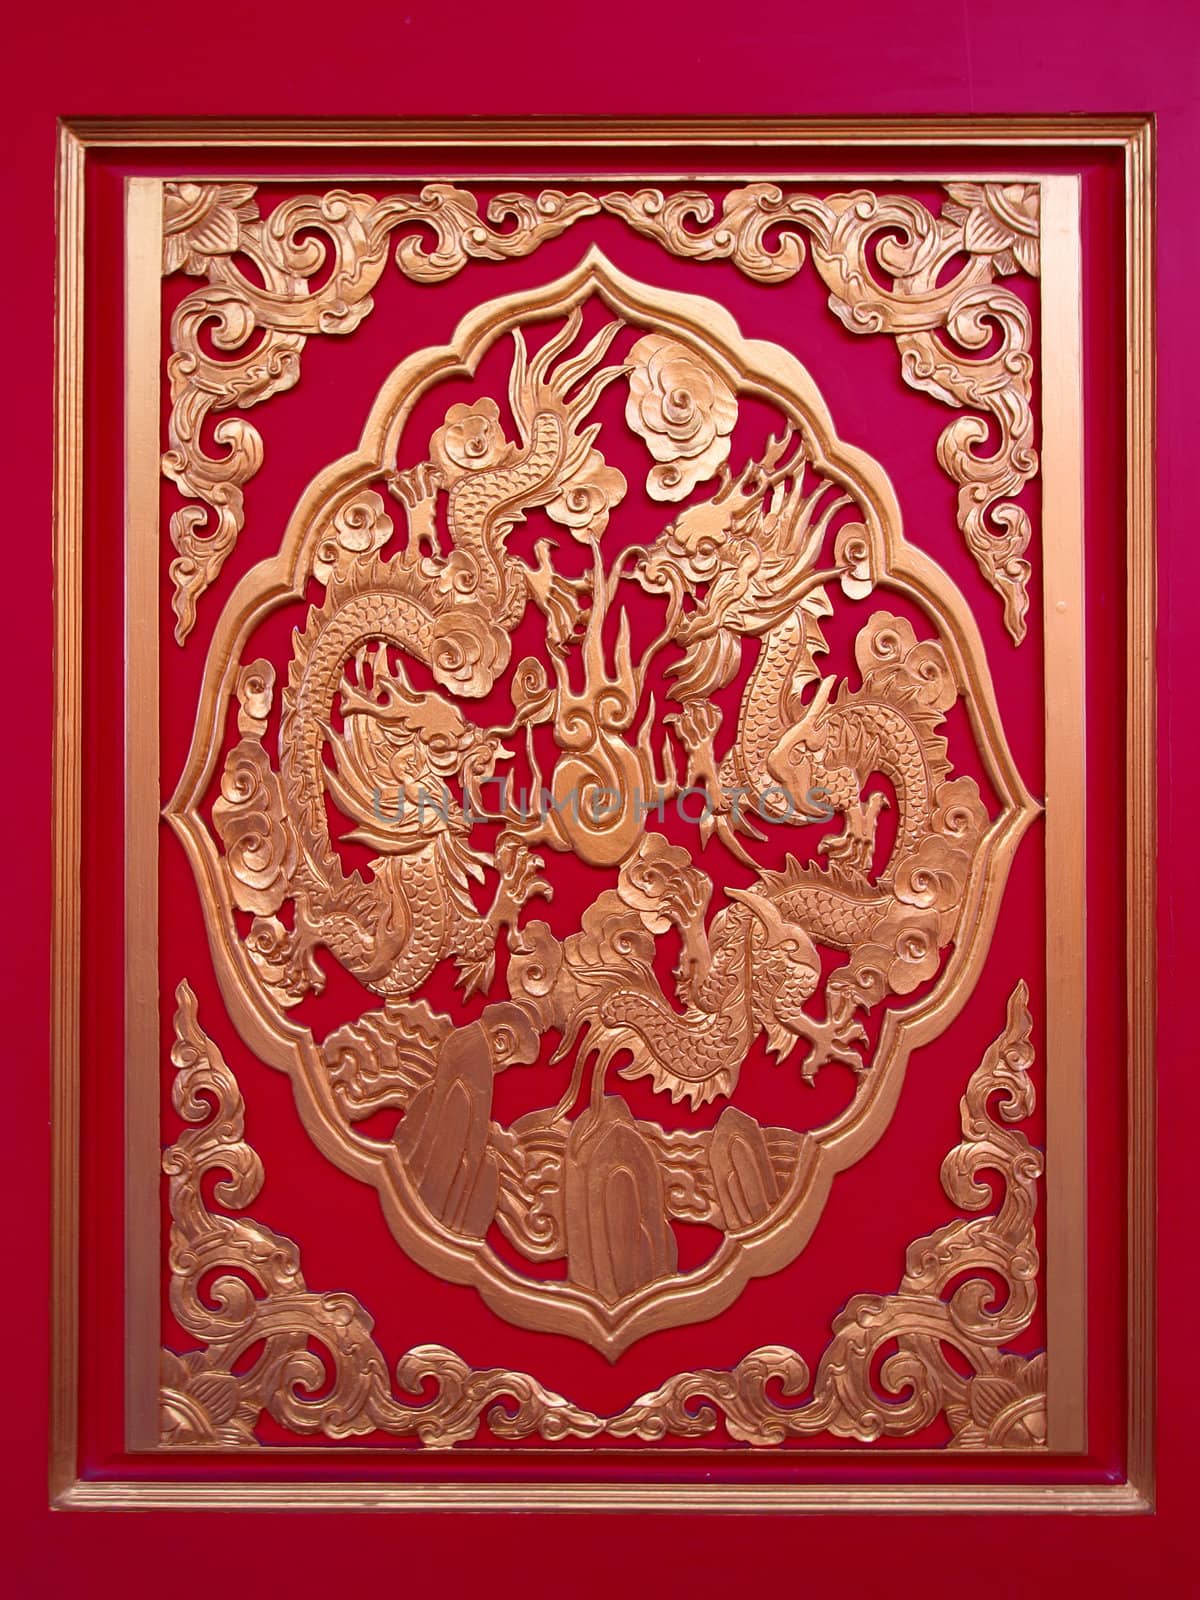  Golden Chinese Dragon in red wall ,temple in thailand